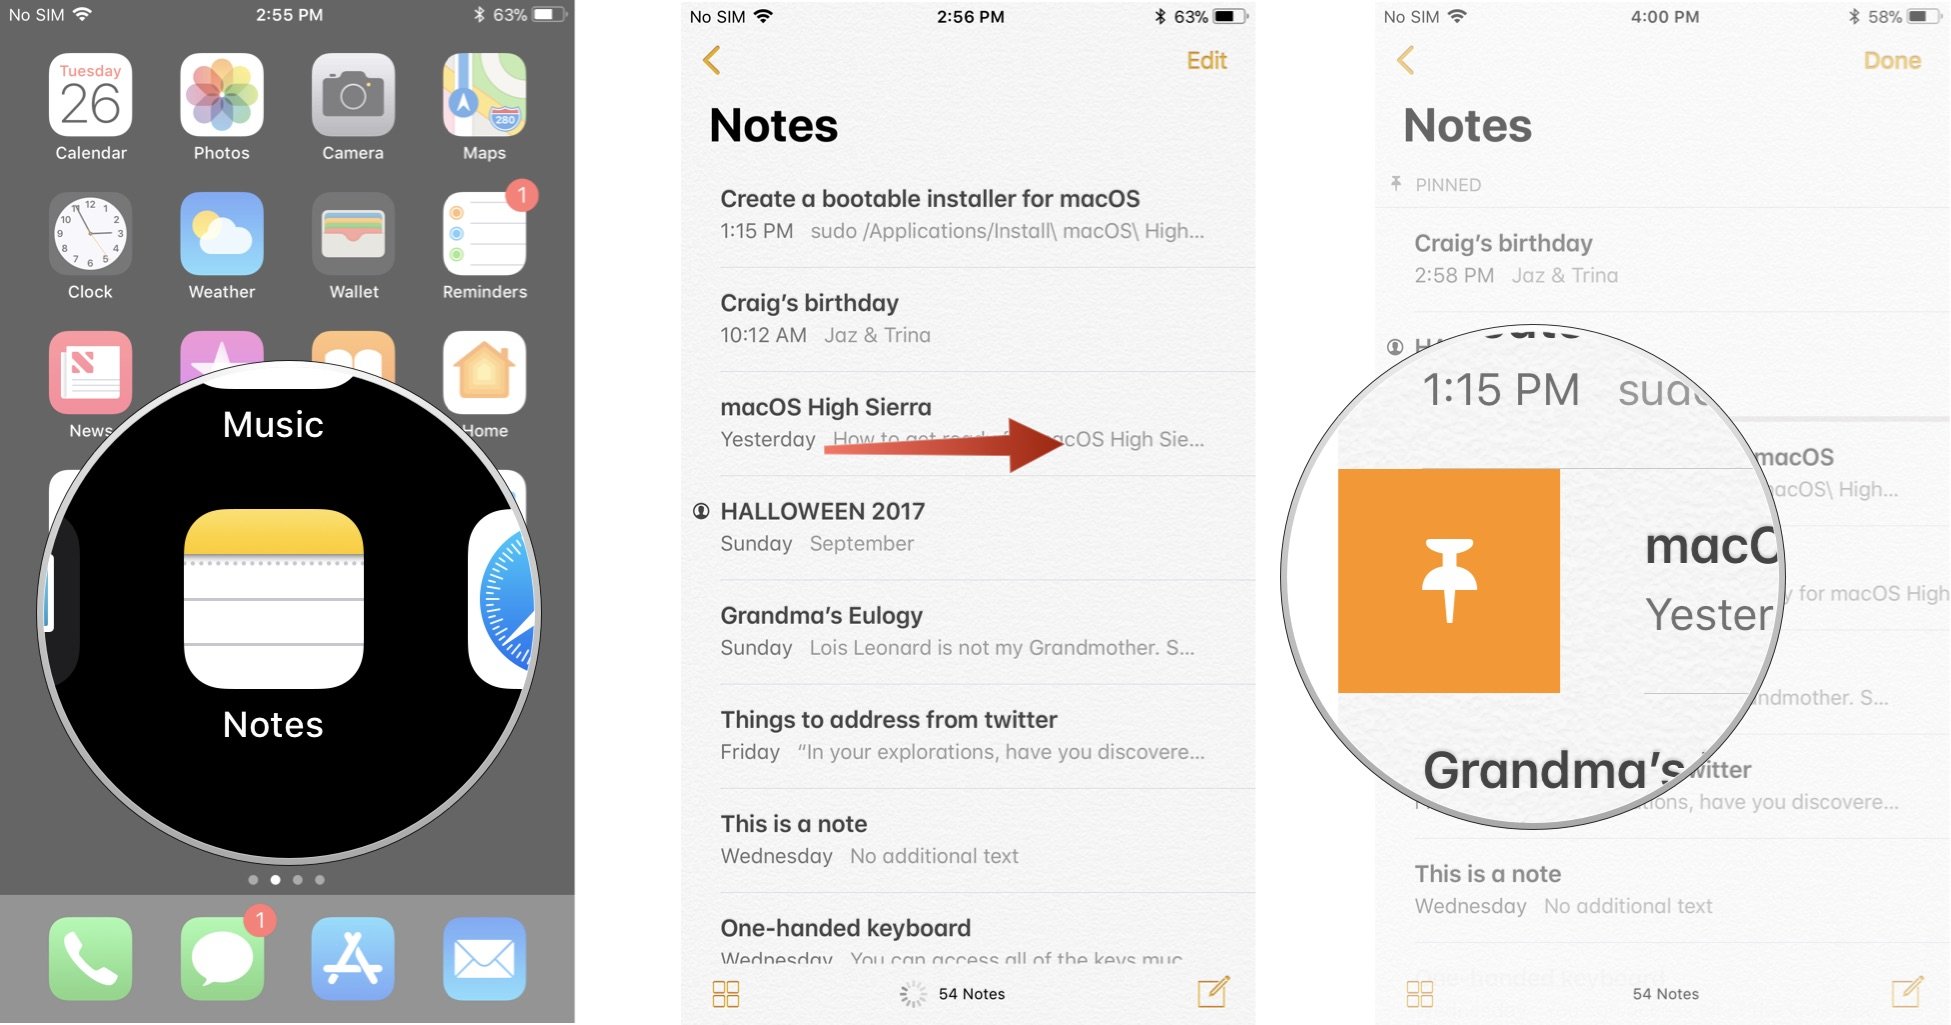 How to pin a note to the top of a list in Notes for iPhone 